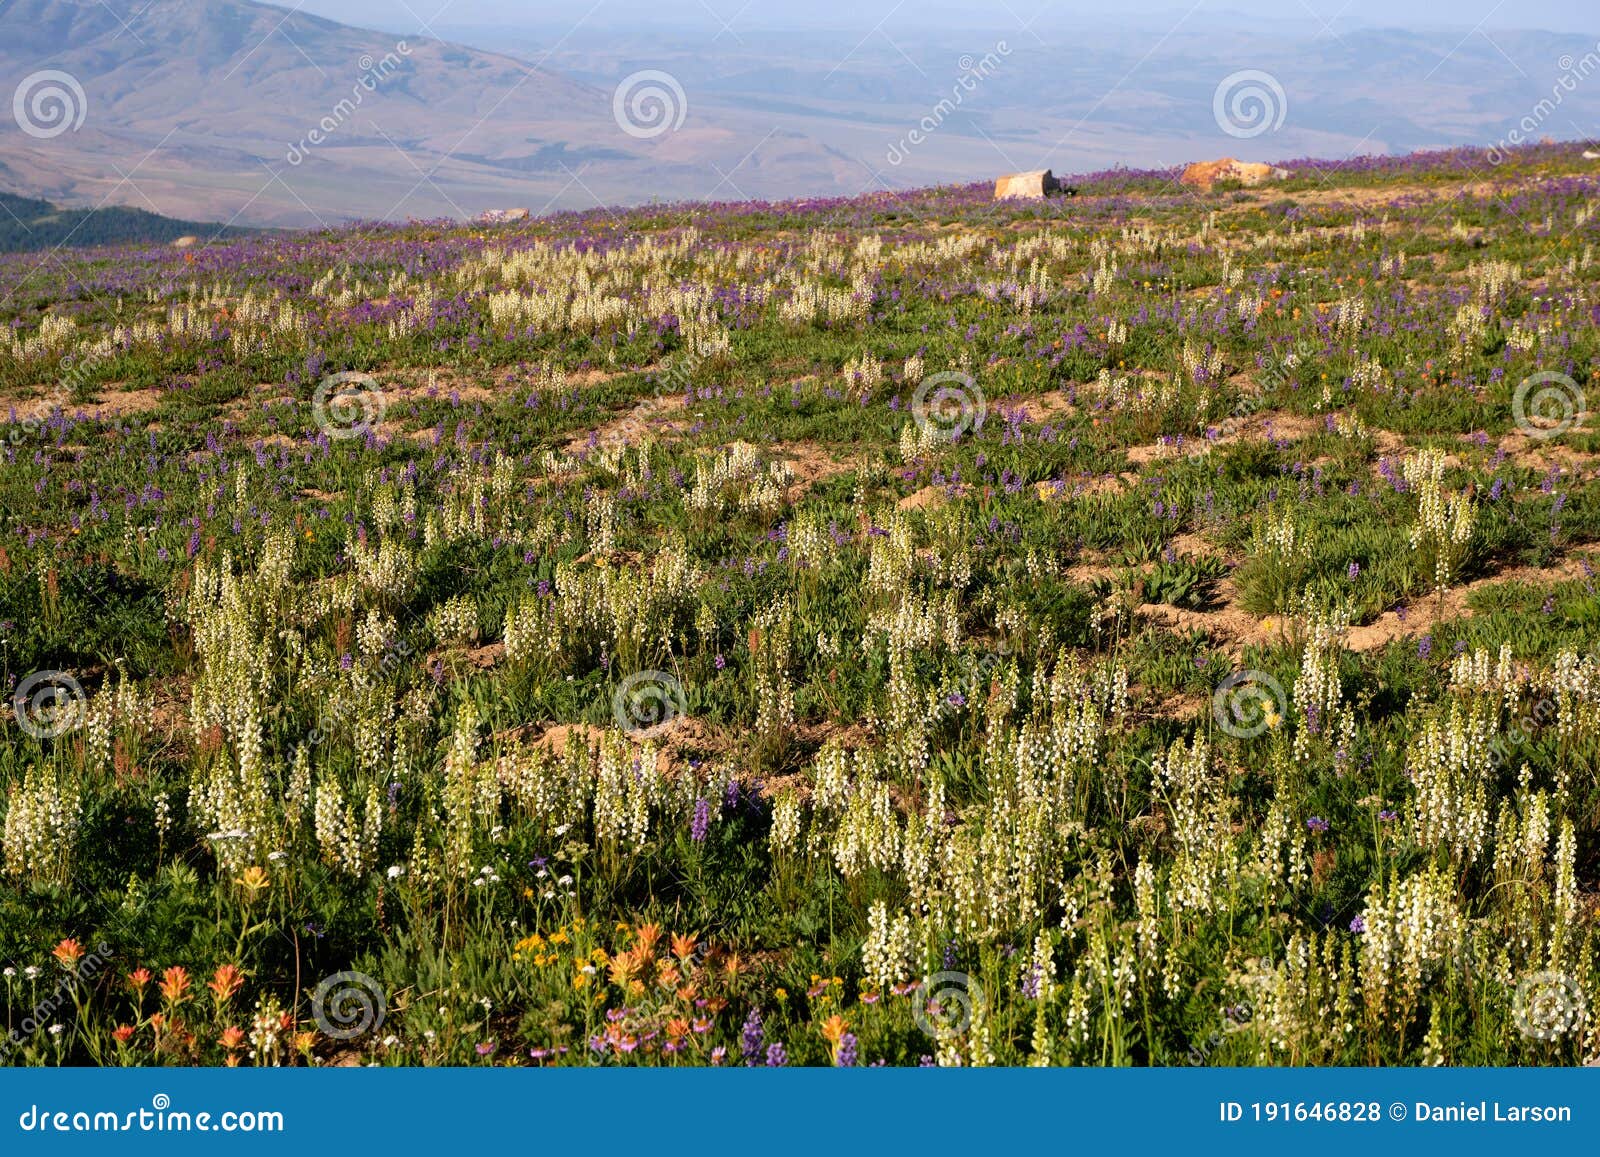 hillside of wildflowers in the albion mountains